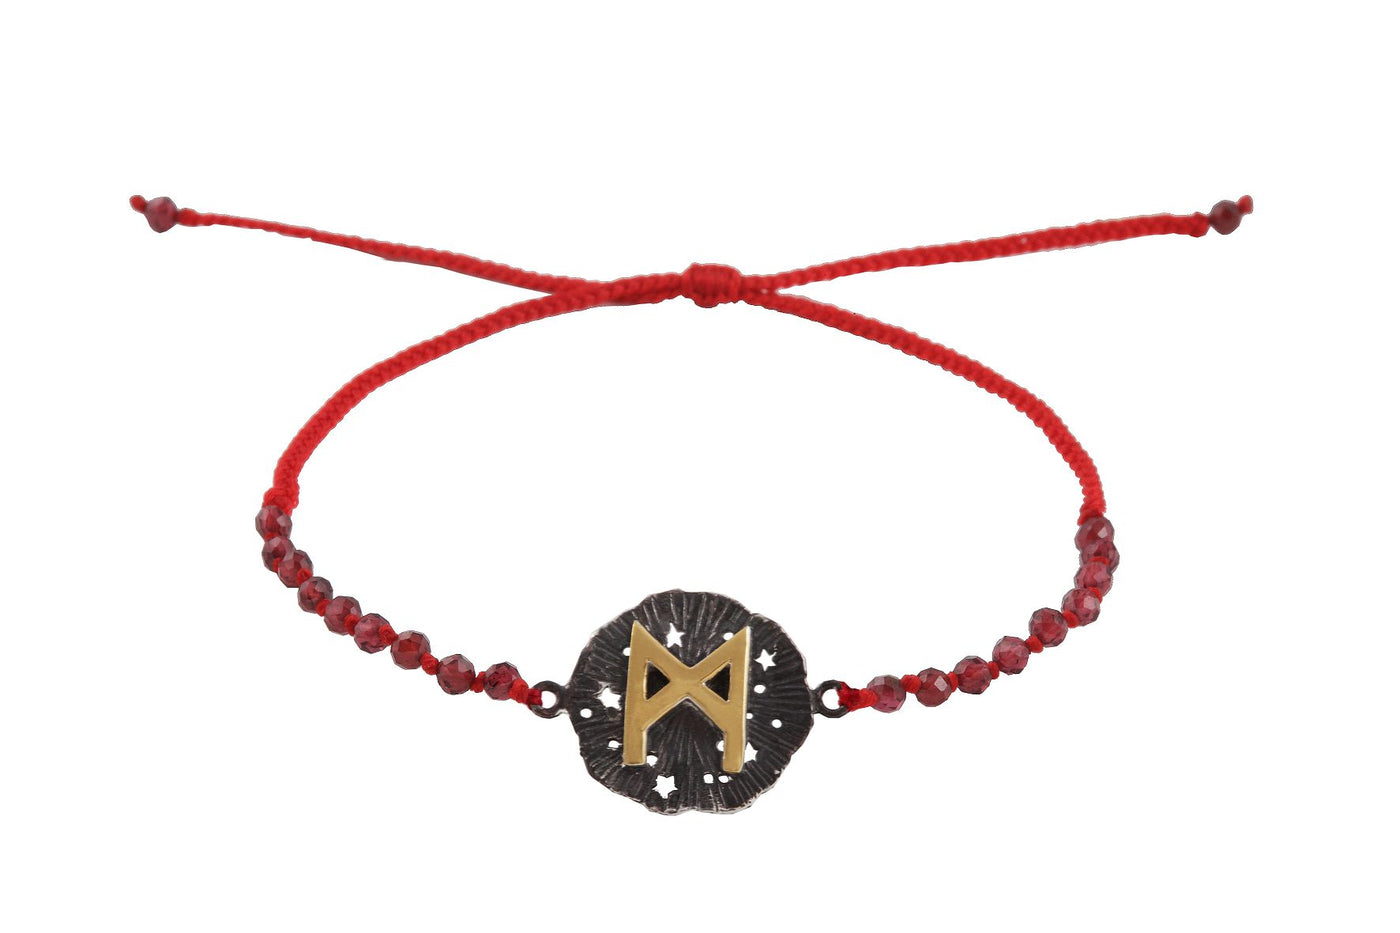 Runic medallion amulet Manaz bracelet with beads. Gold plated and oxide